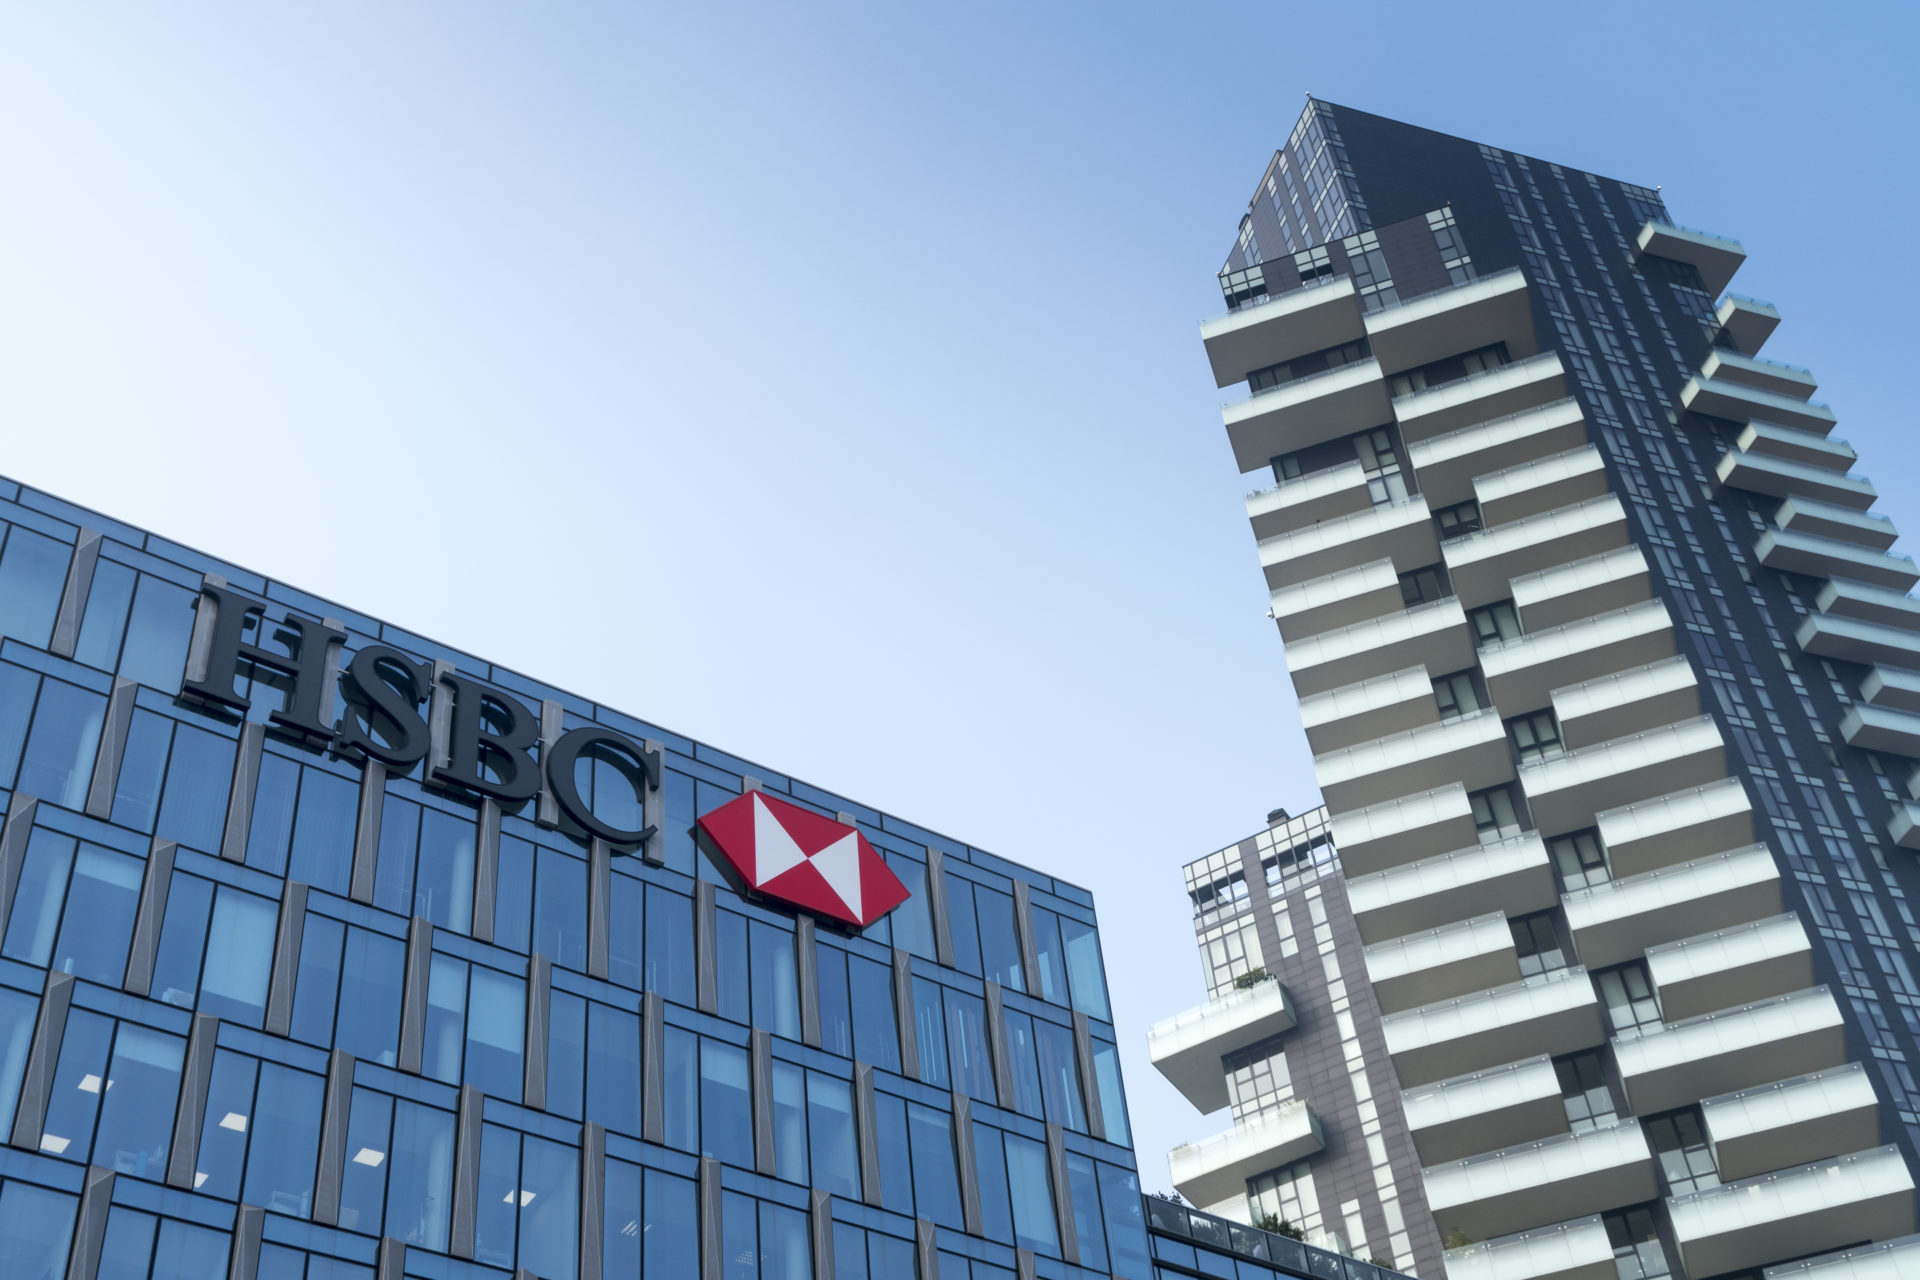 HSBC Executes India’s First Overseas Blockchain Payment for Major Company